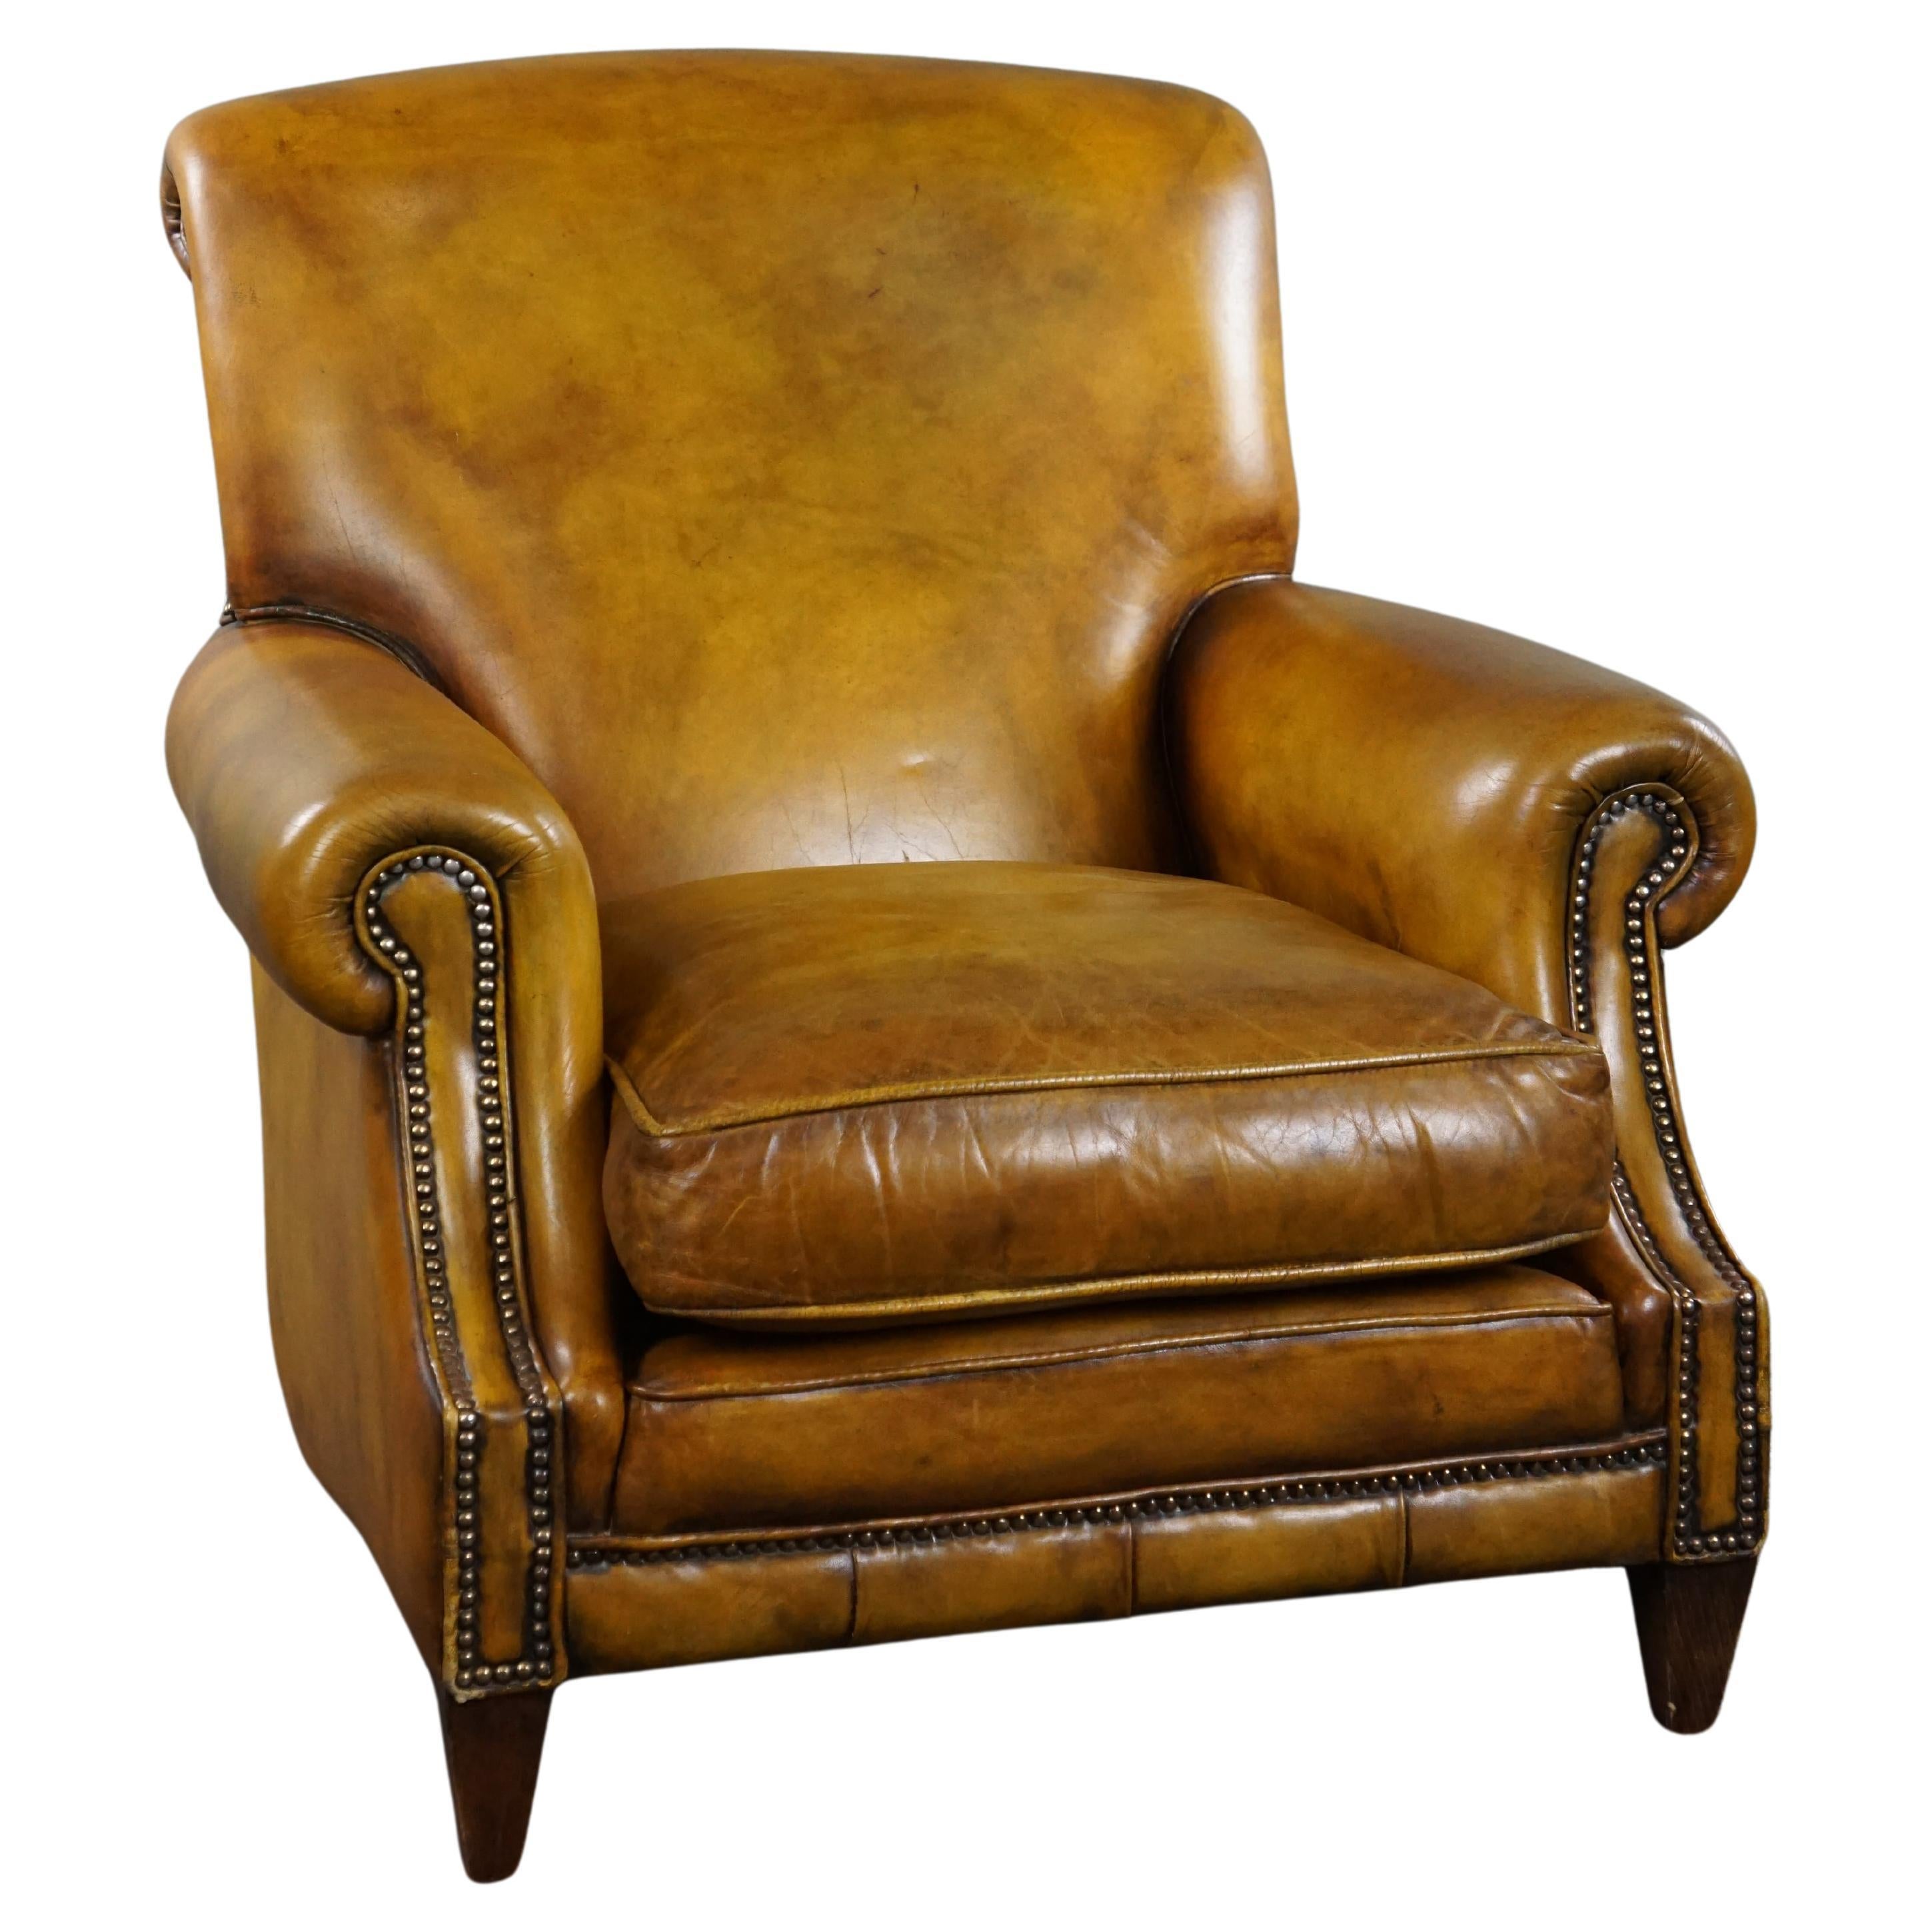 Large cowhide armchair on wheels For Sale